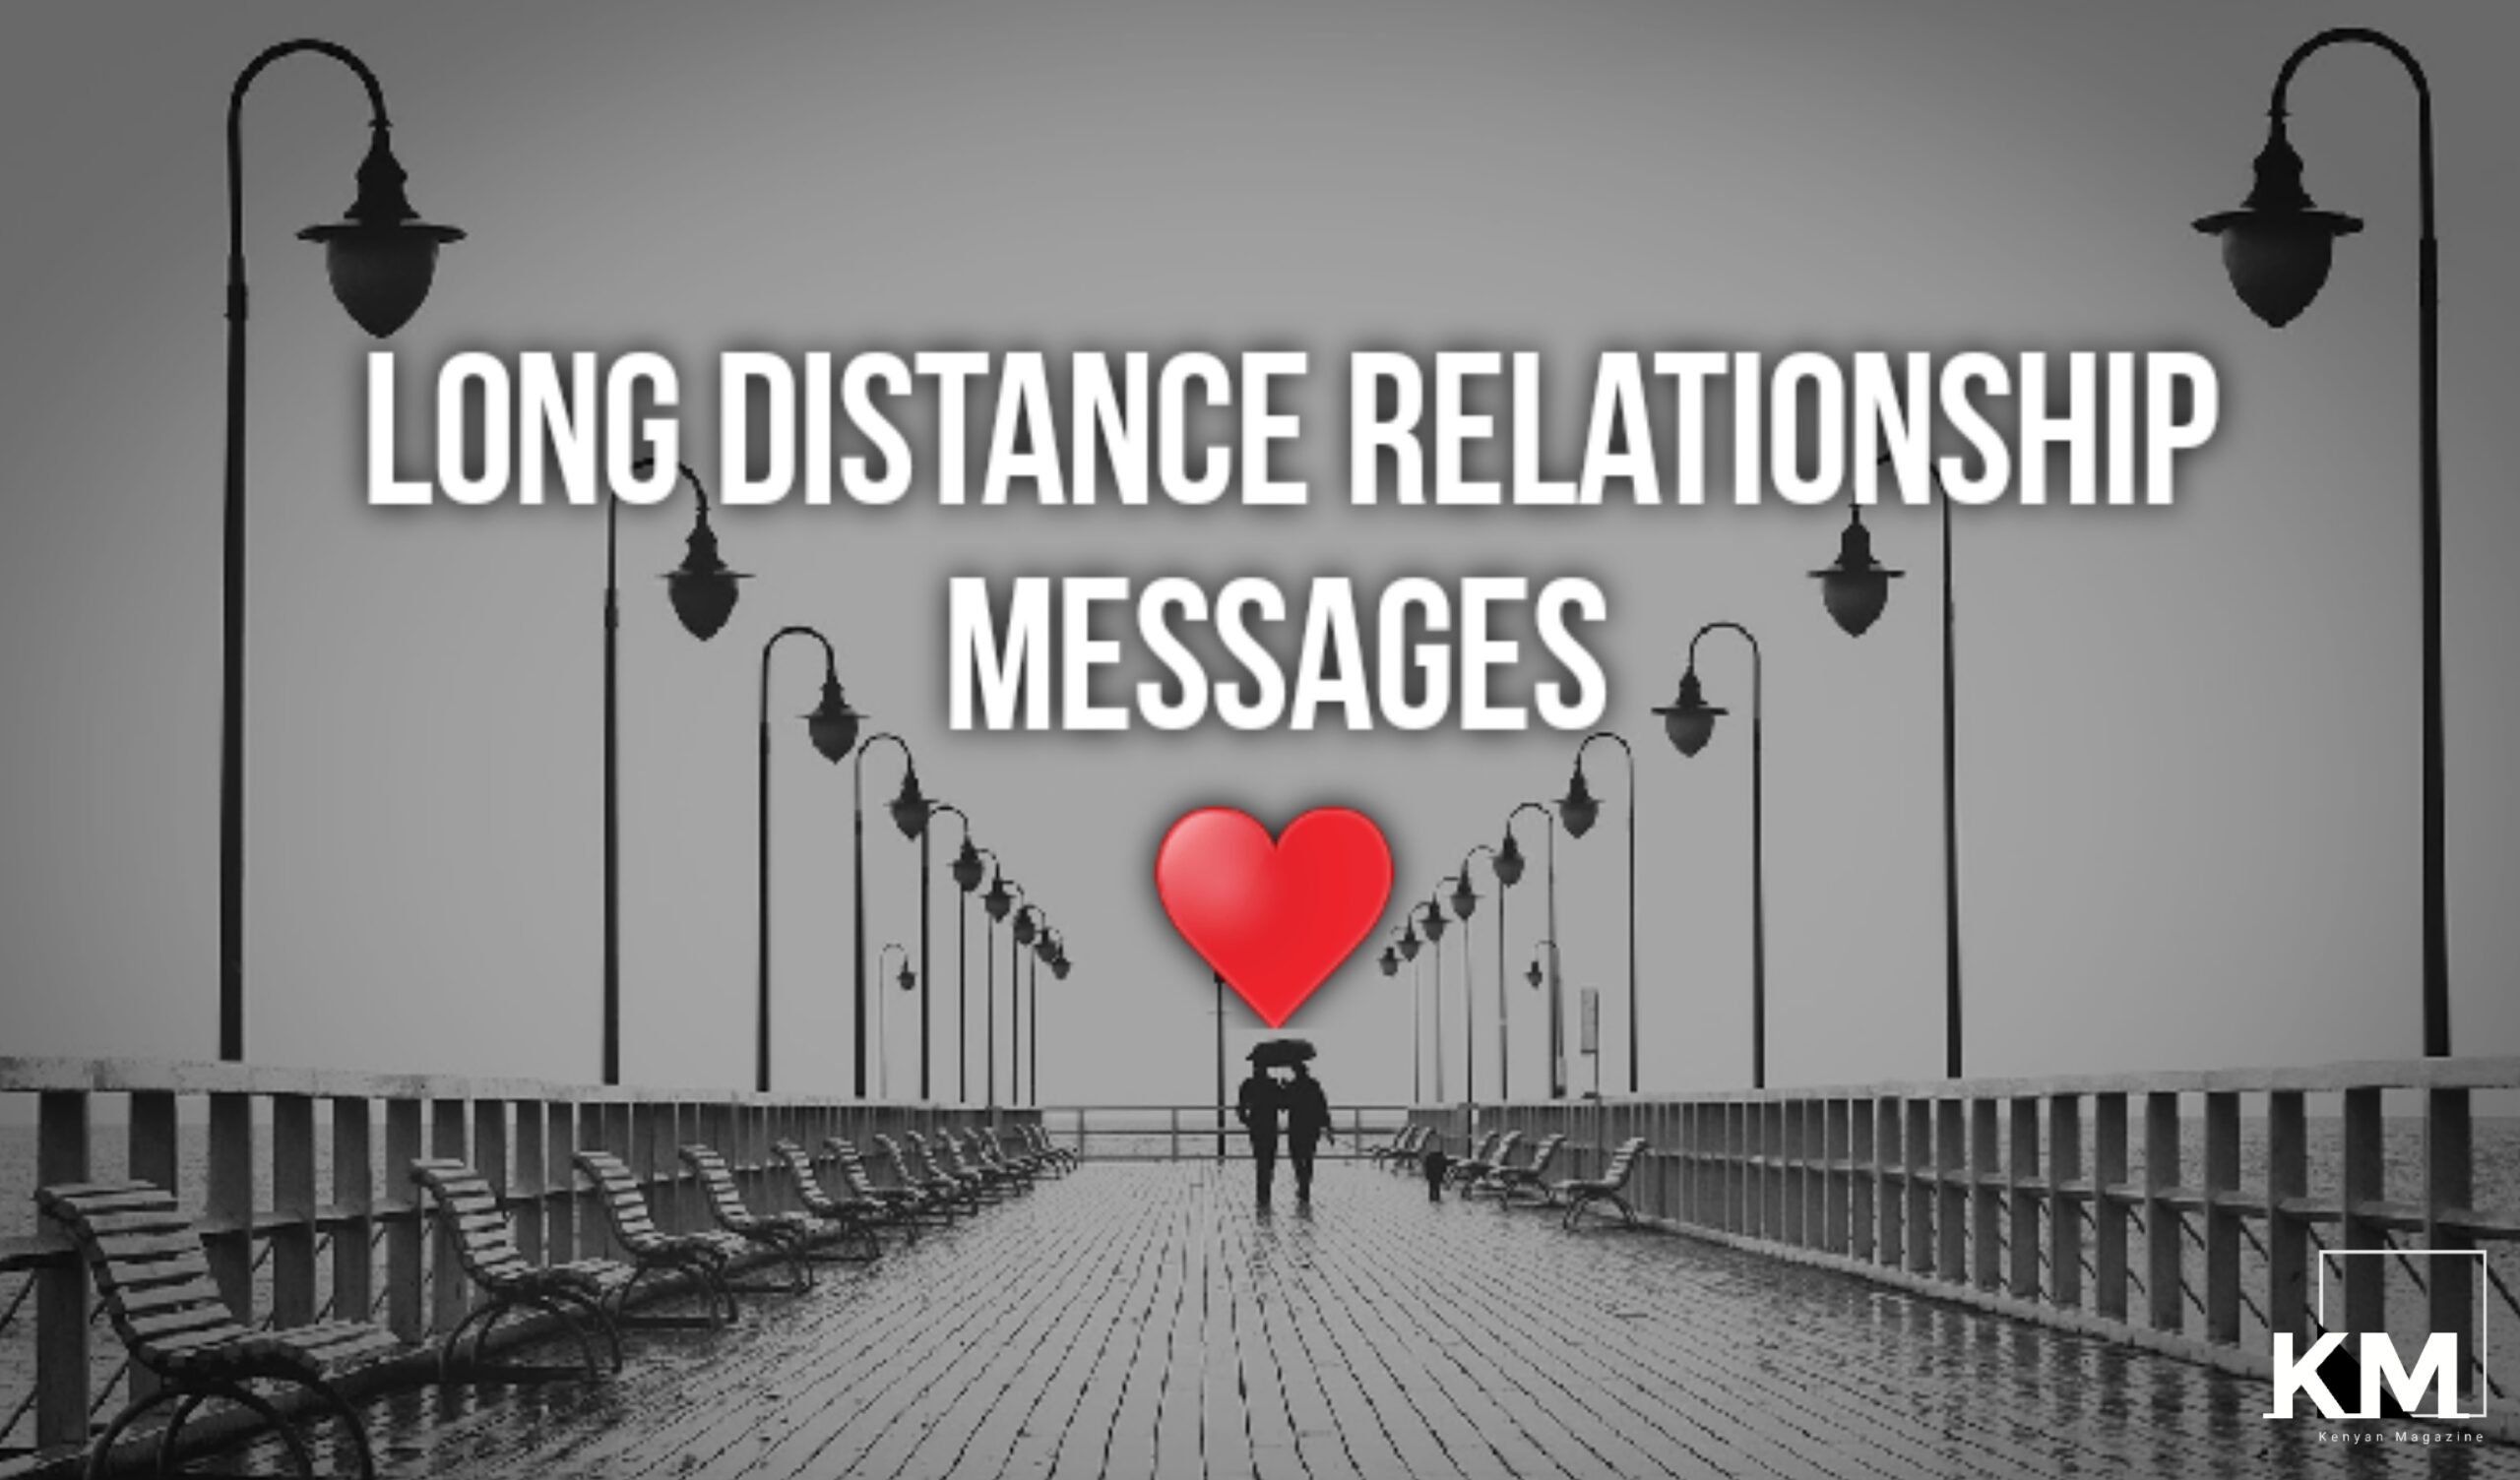 Long Distance relationship messages for her